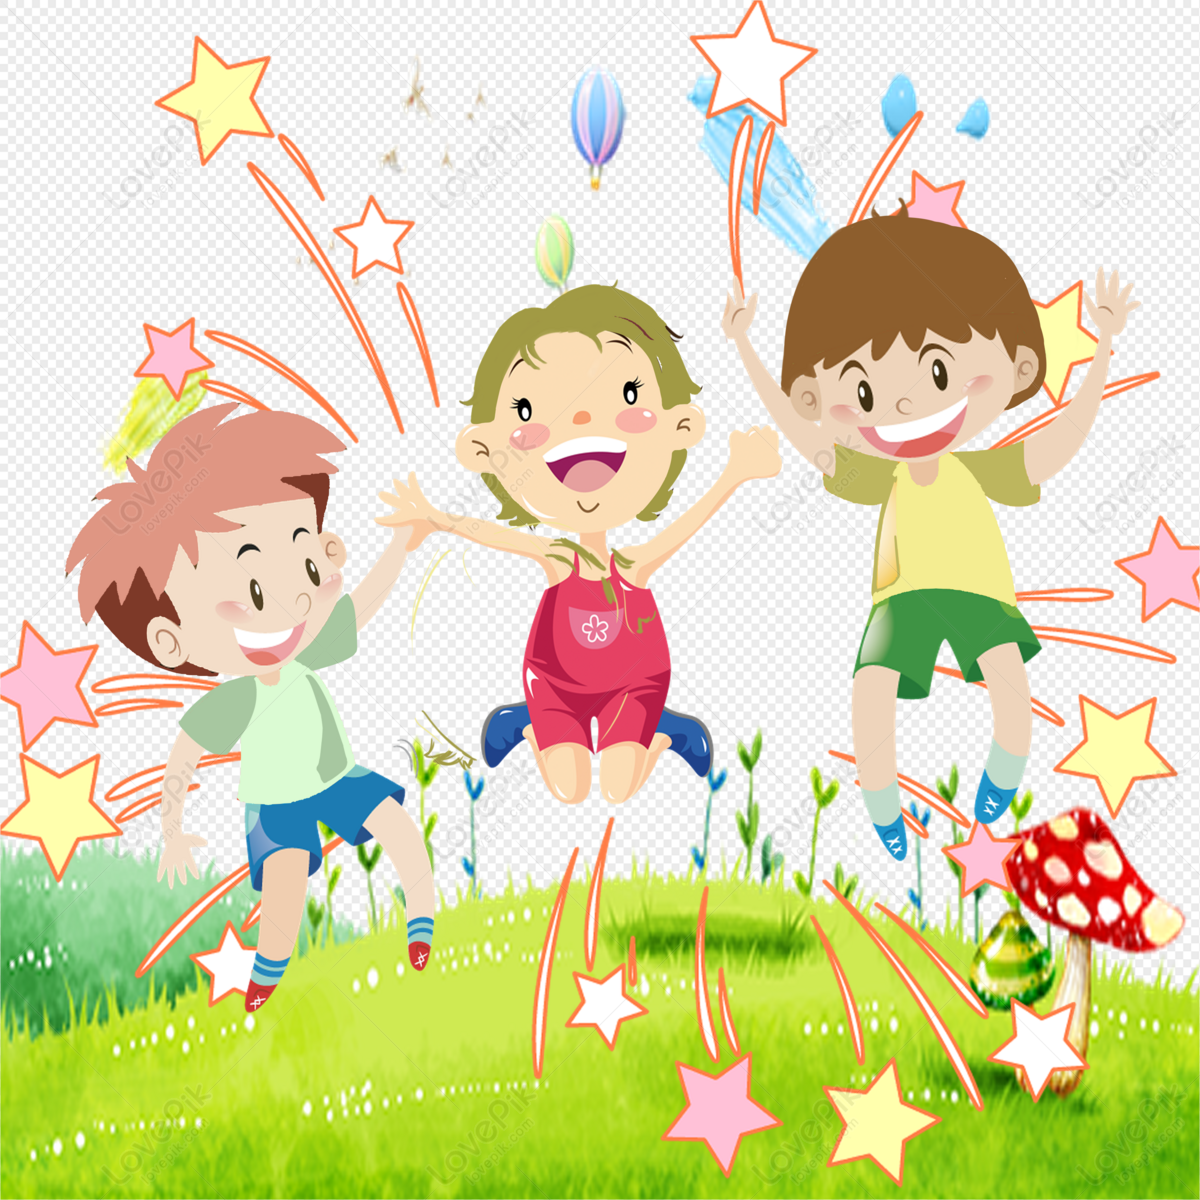 Jumping Children PNG Picture And Clipart Image For Free Download - Lovepik  | 401330055